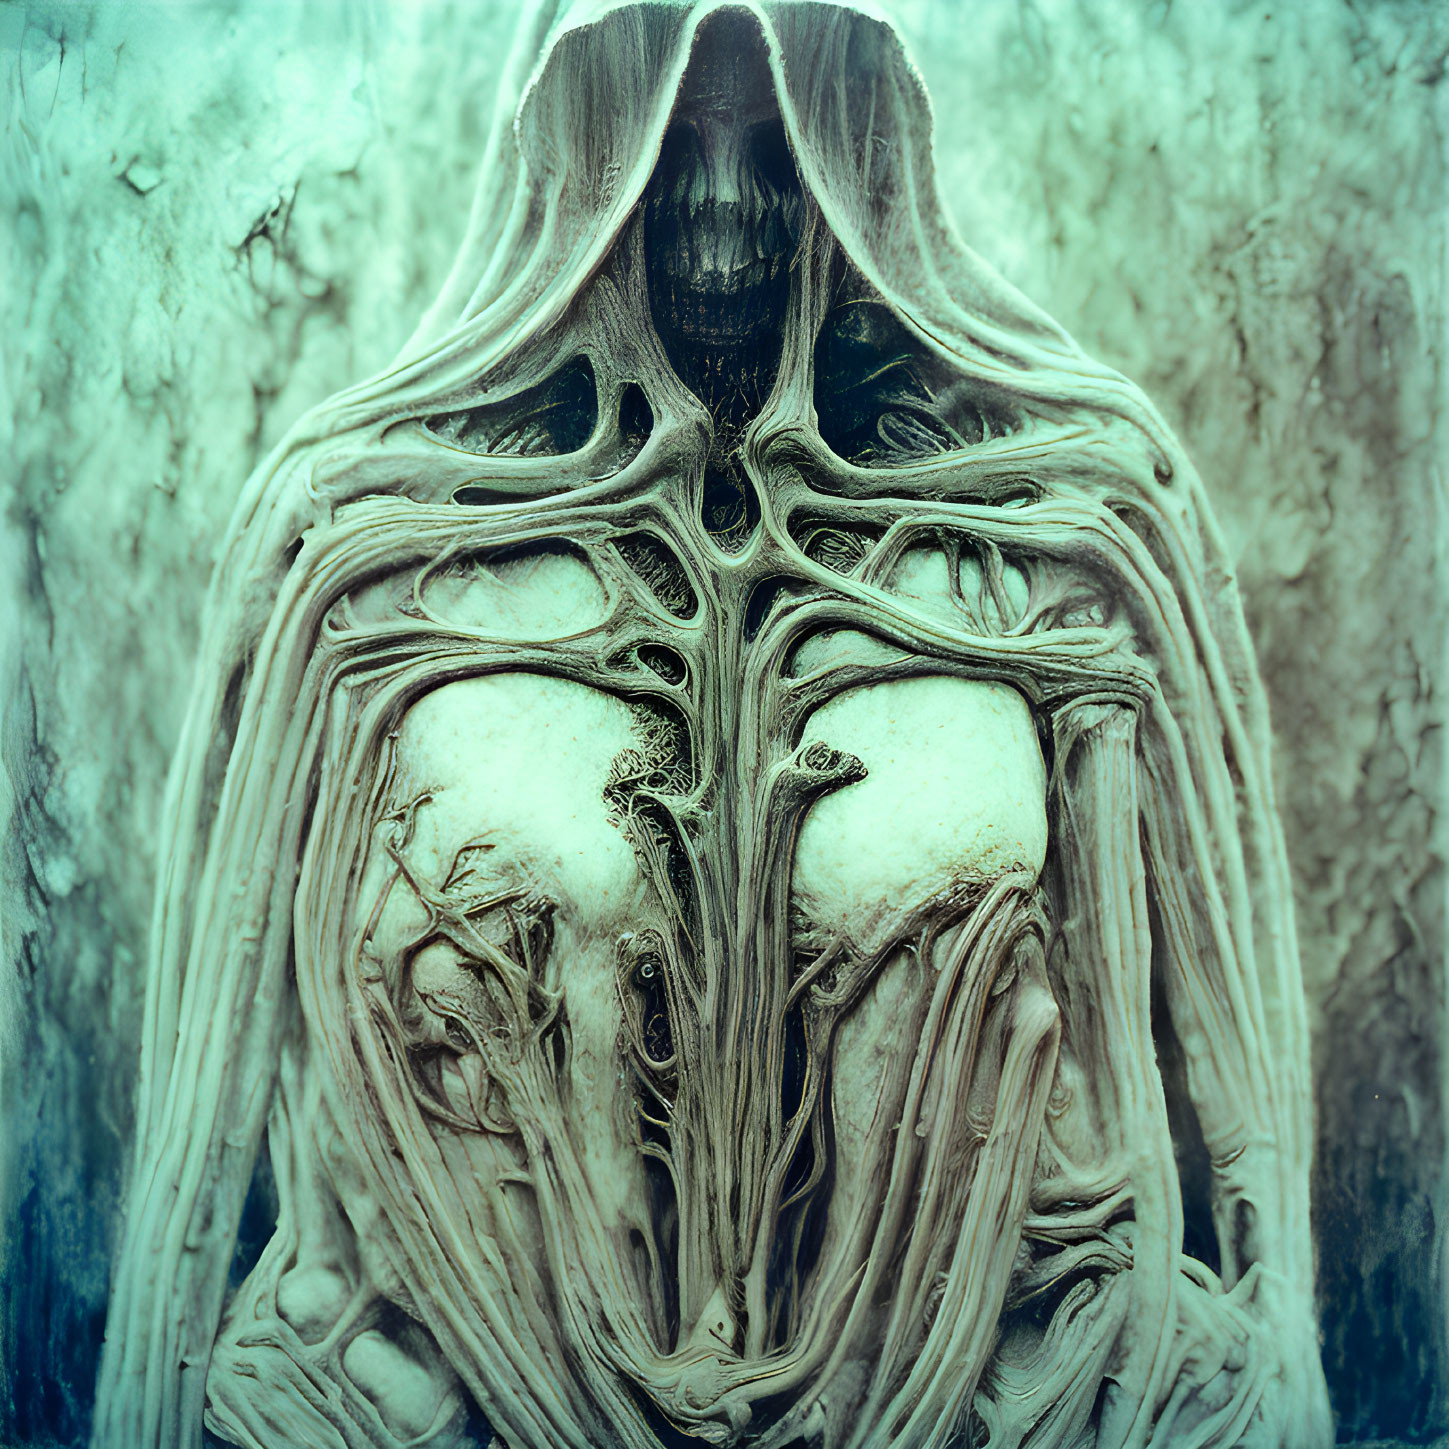 Hooded figure with root-like structures on chest against textured background.